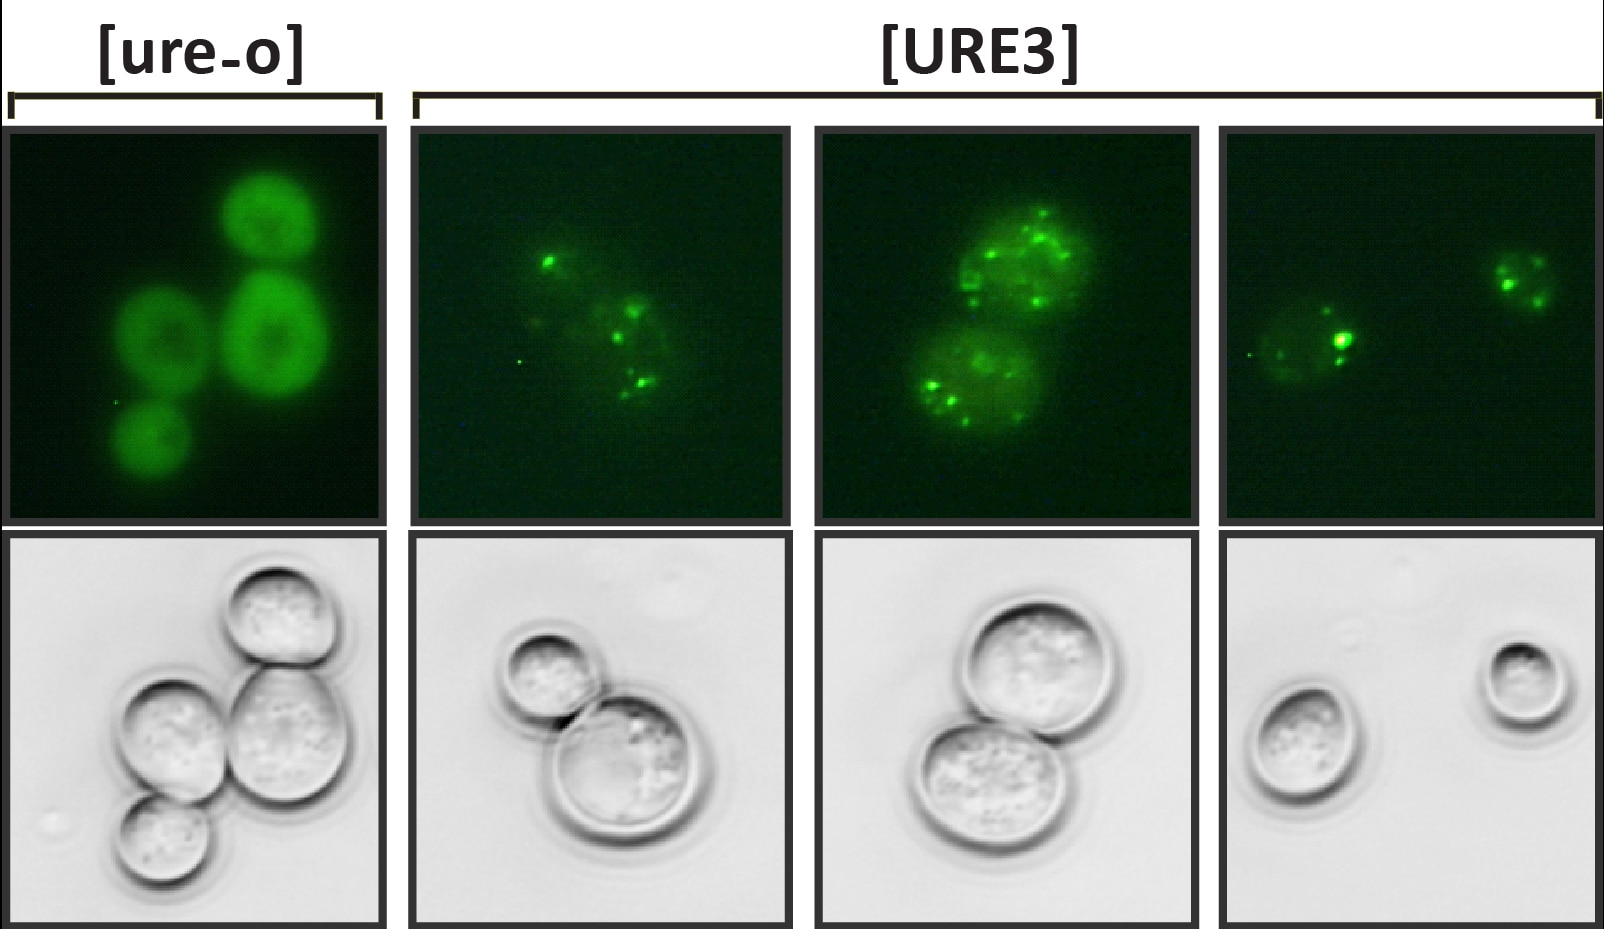 Ure2-GFP aggregates in a URE3 prion cell.